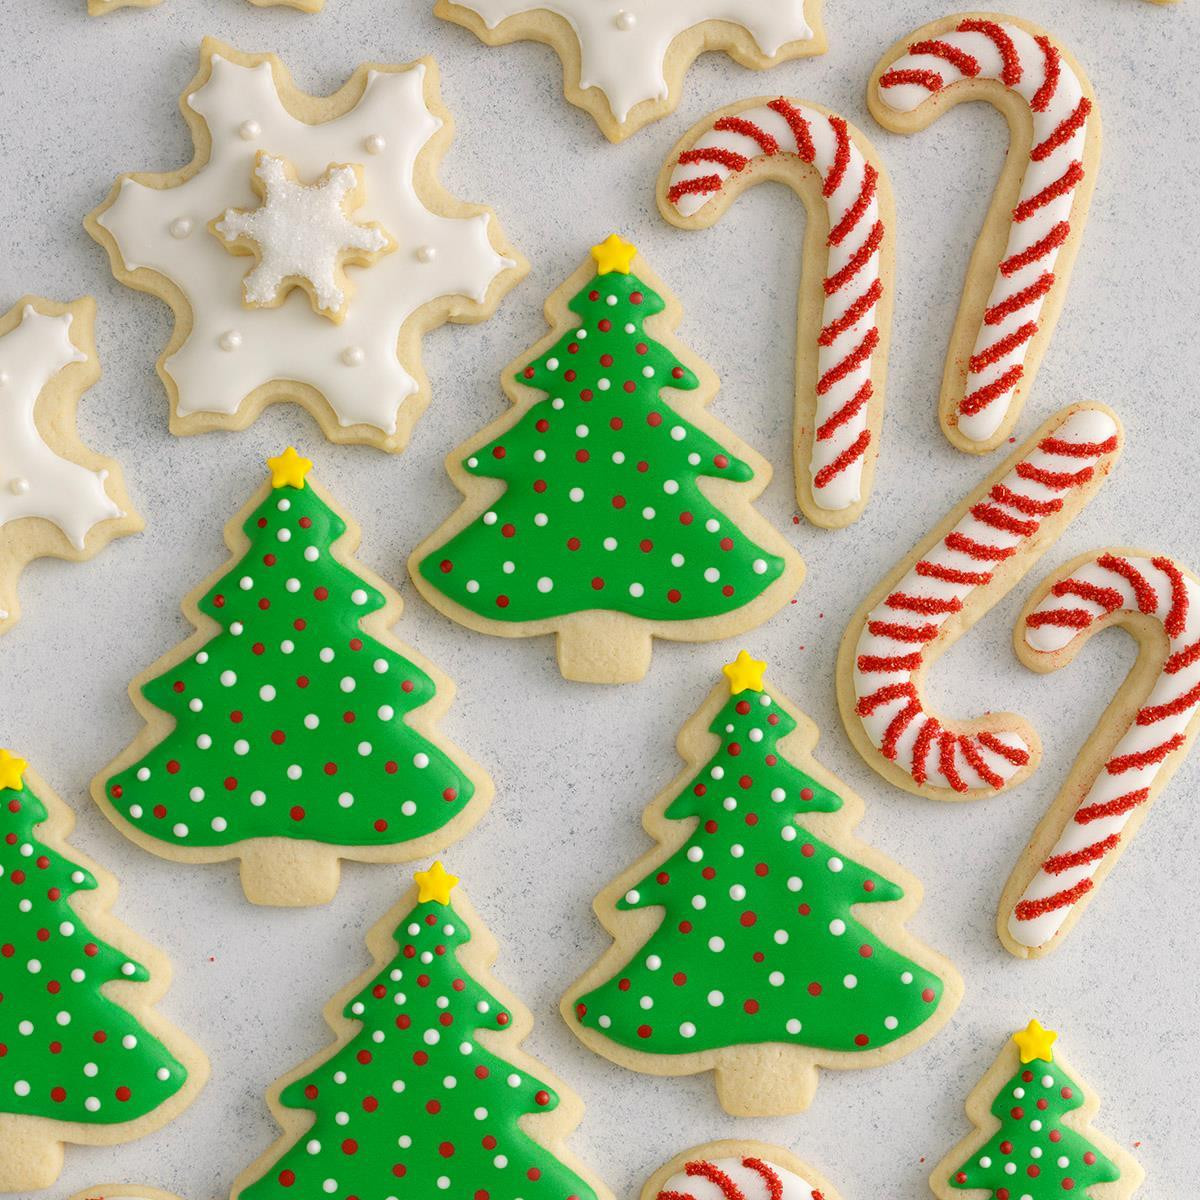 Christmas Cookies Decorated
 Decorated Christmas Cutout Cookies Recipe